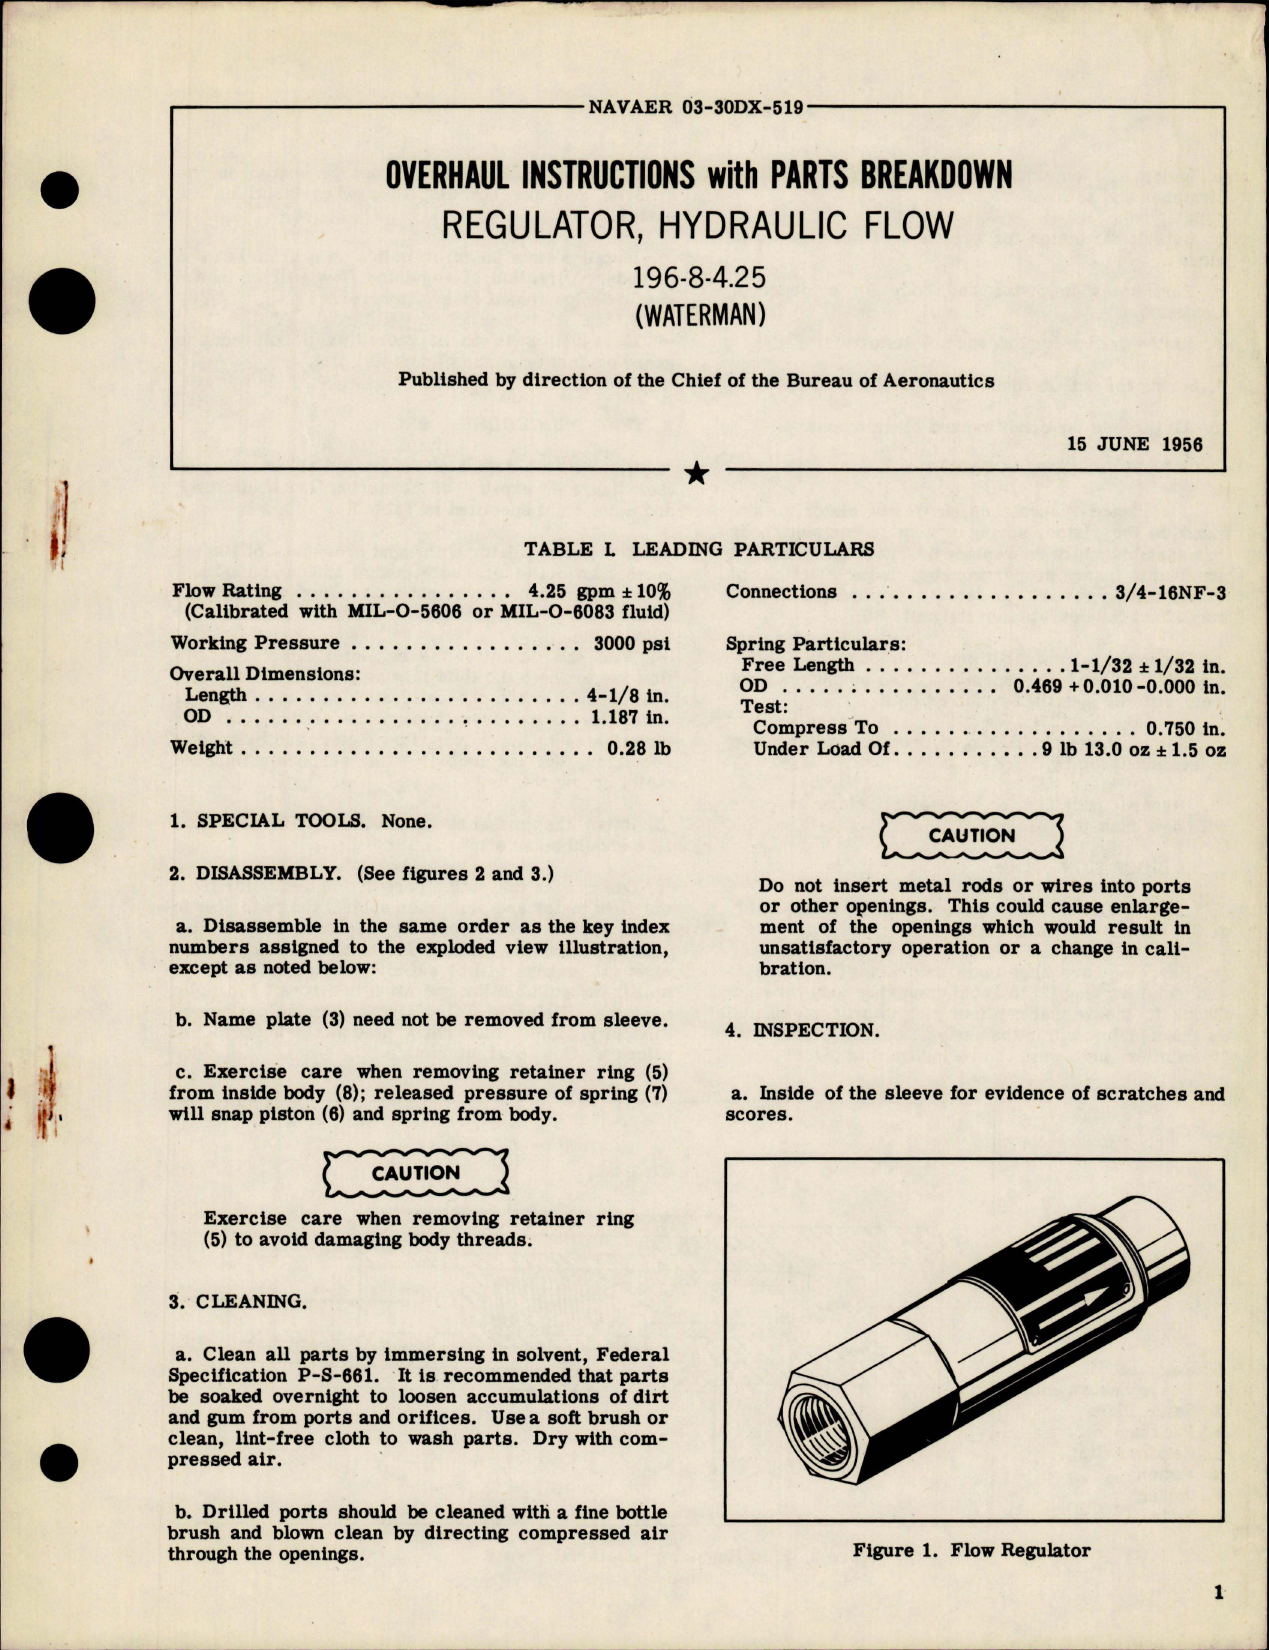 Sample page 1 from AirCorps Library document: Overhaul Instructions with Parts Breakdown for Hydraulic Flow Regulator - Part 196-8-4.25